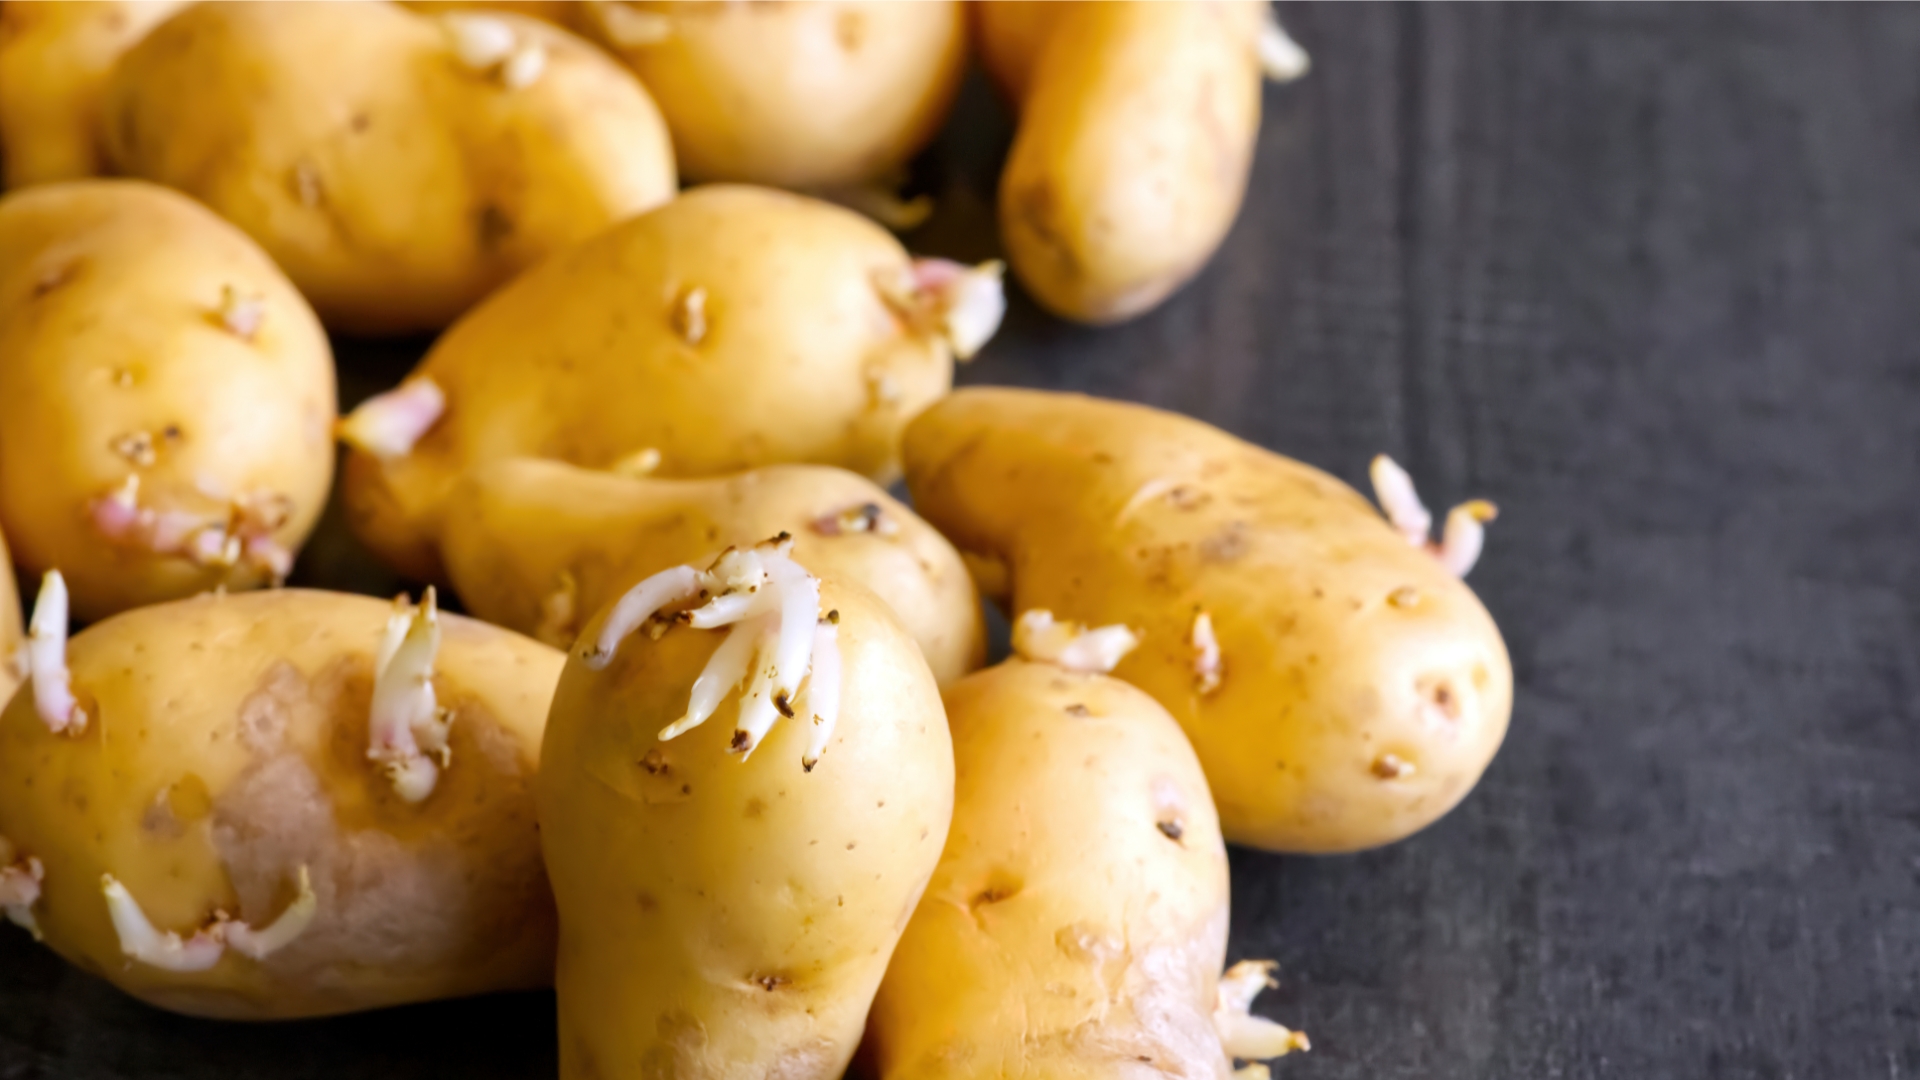 Does Chitting Your Potatoes Before Planting Lead To A Richer Yield?